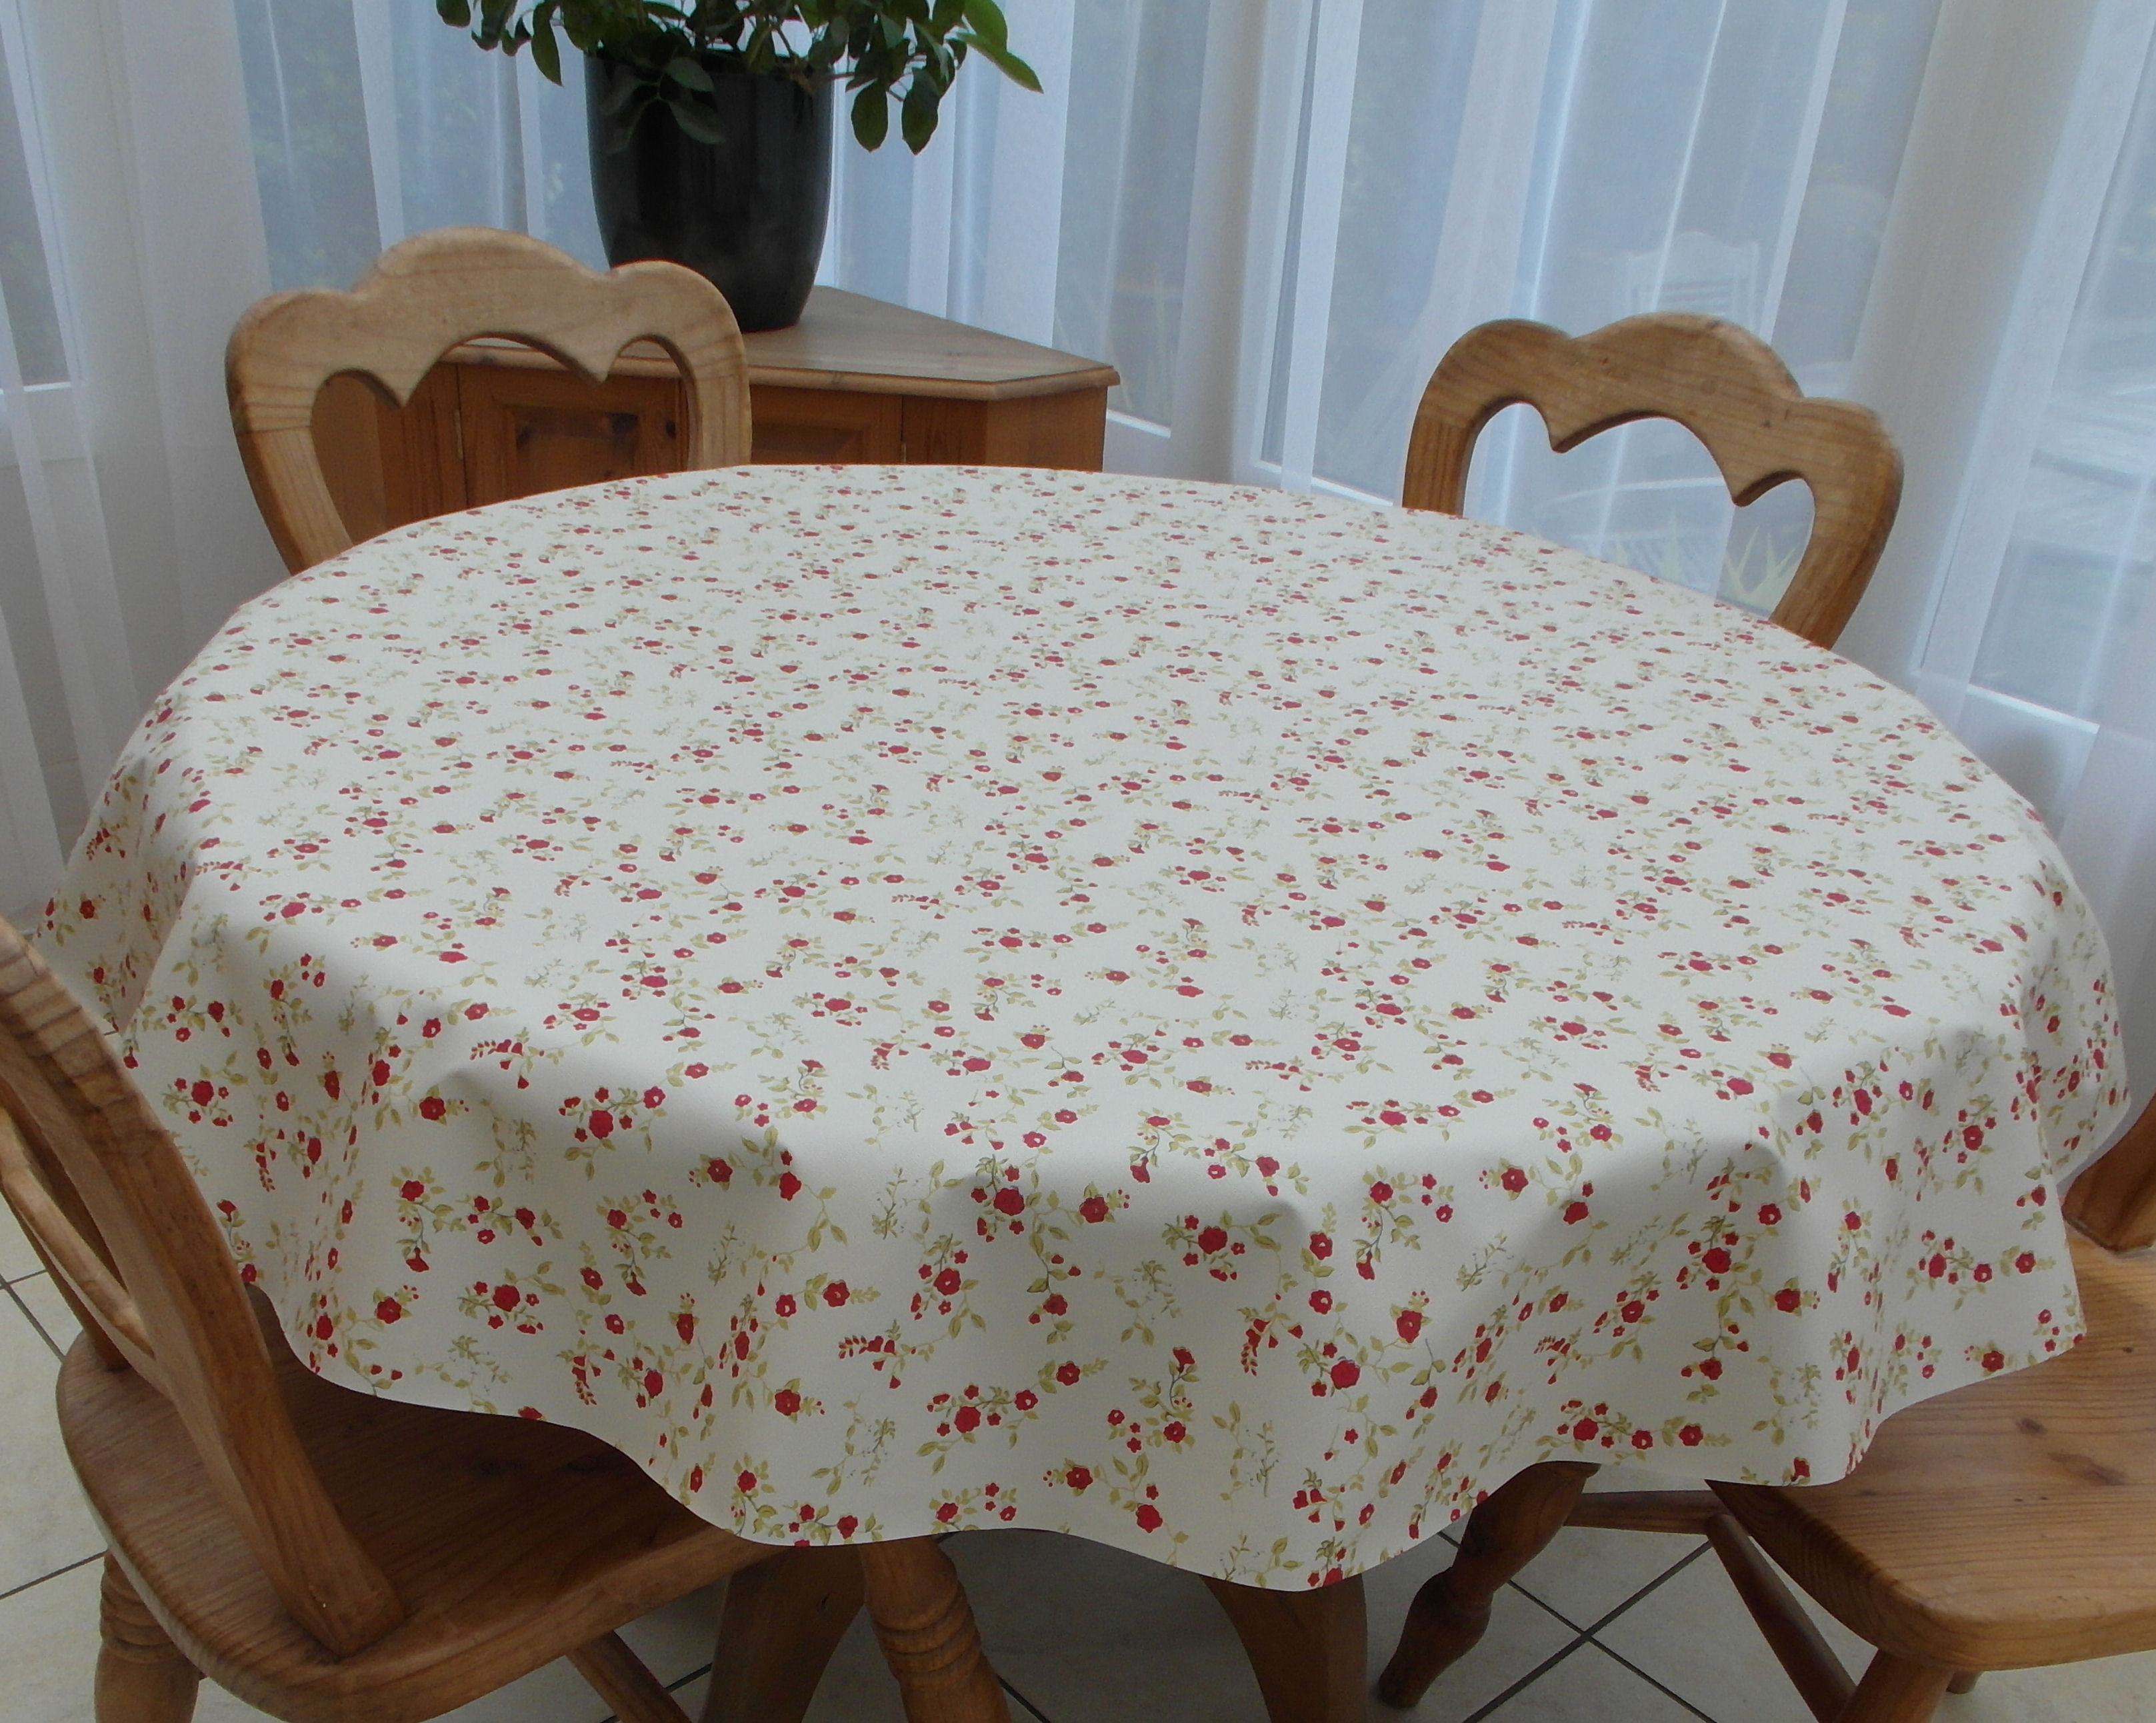 Red wipe clean tablecloth